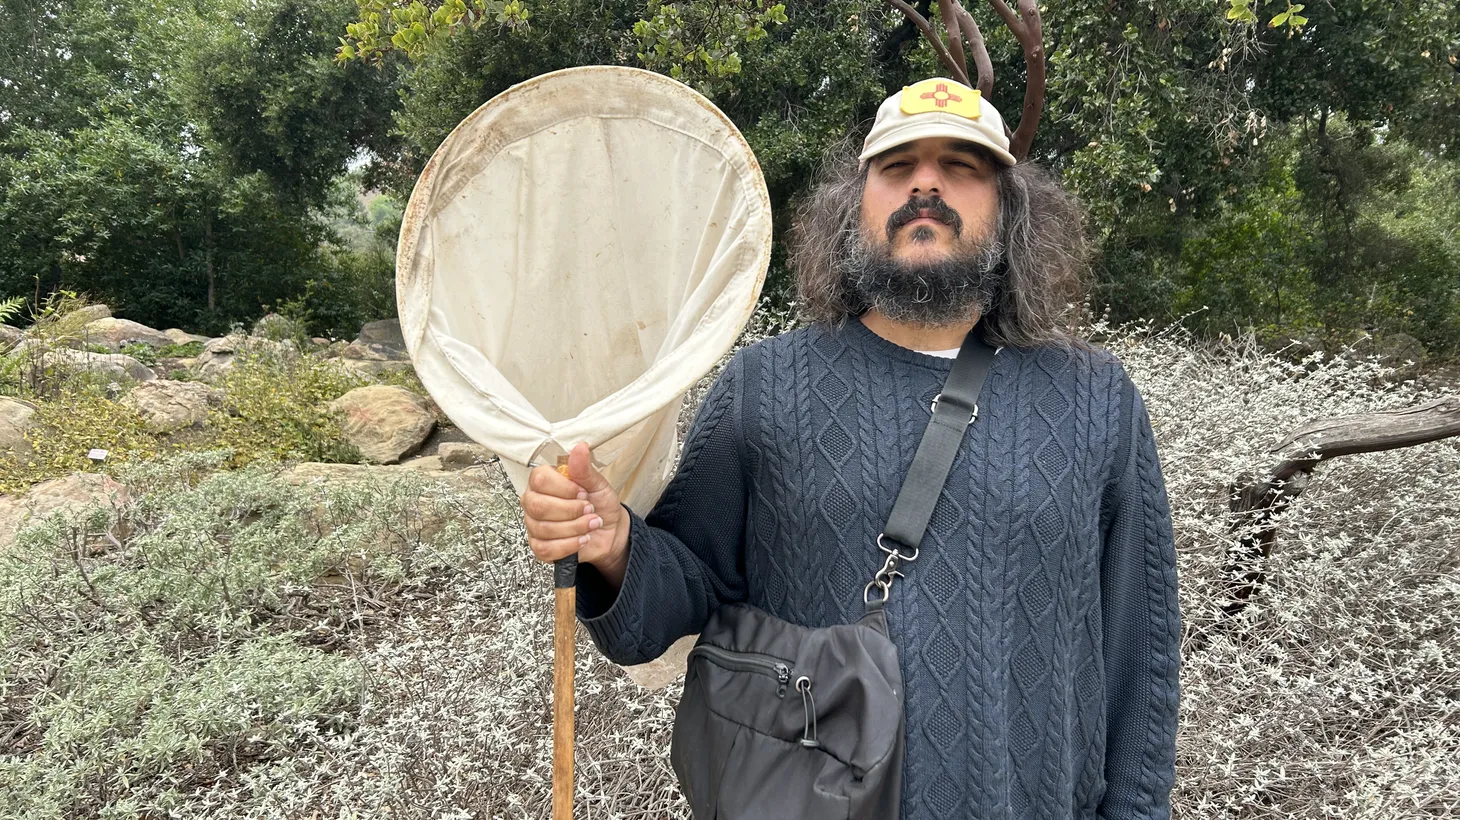 “I'm the terrestrial invertebrate conservation ecologist at the Santa Barbara Botanic Garden, which is just a long complicated title for ‘bug person,’” says Zach Phillips of his gig at the garden.